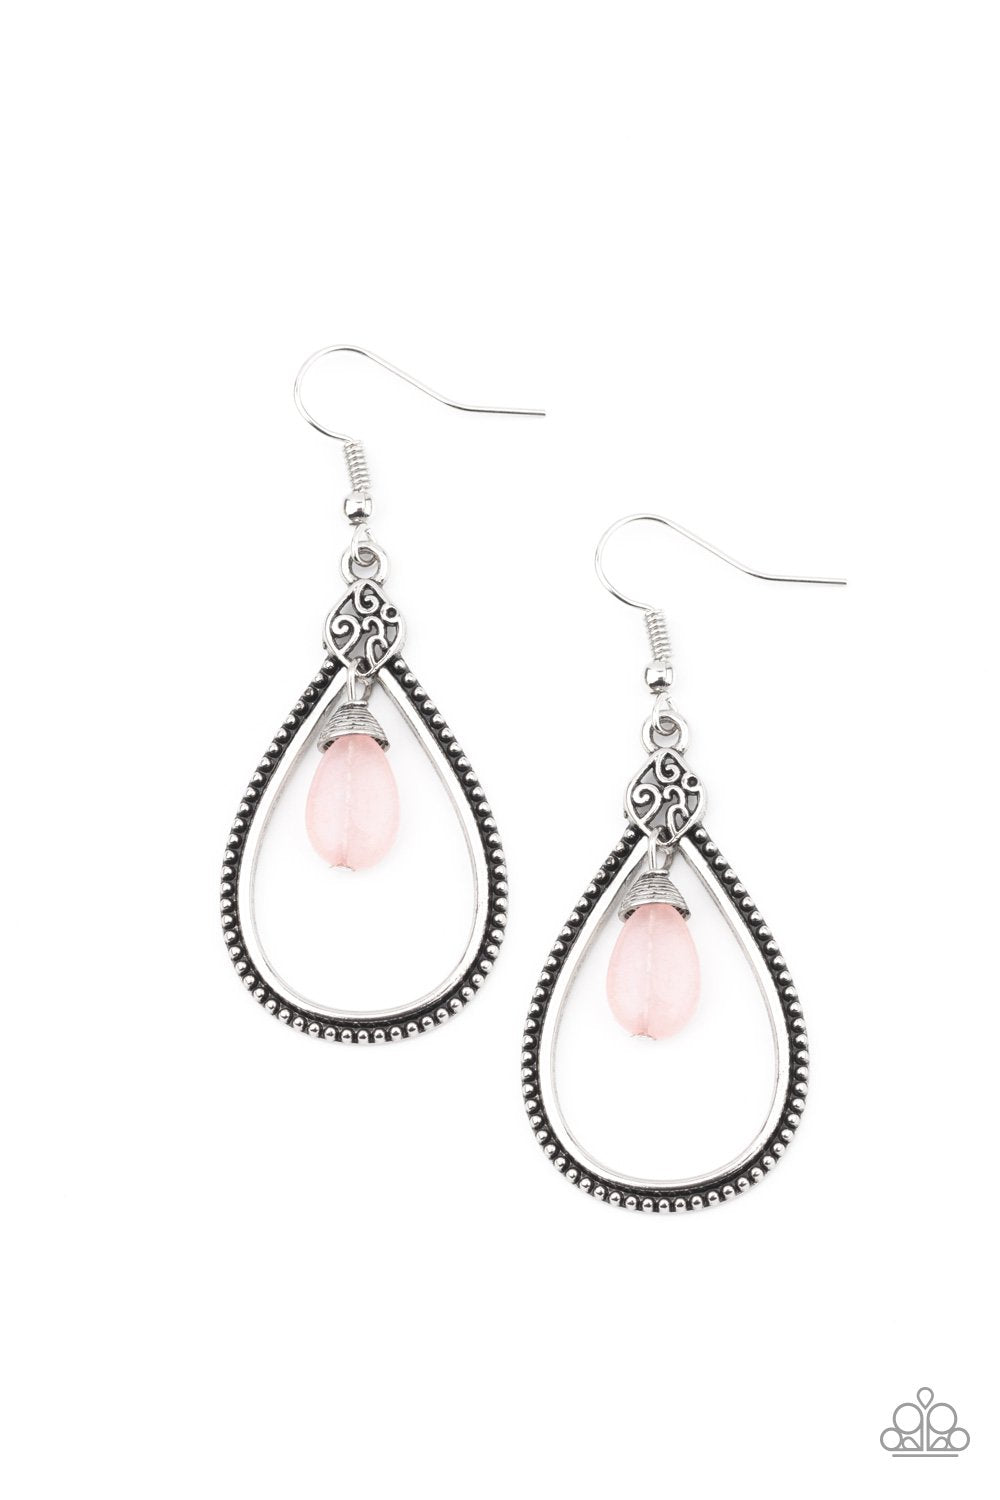 I'll Believe It ZEN I See It Pink Earrings - Paparazzi Accessories- lightbox - CarasShop.com - $5 Jewelry by Cara Jewels